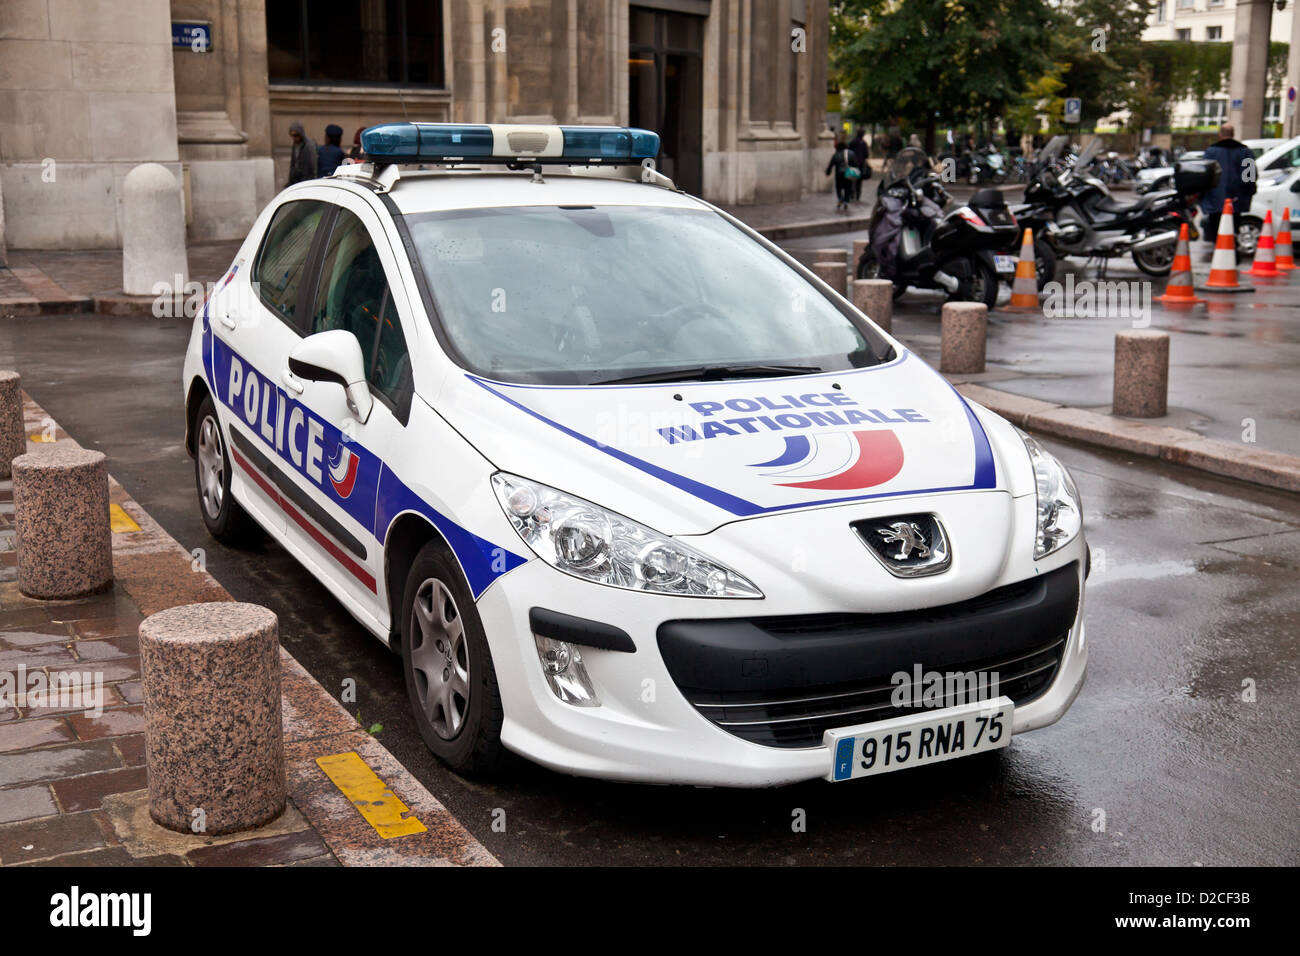 A Renault police car of the Police Nationale, one of France's police  forces, Rue de Viarmes in Les Halles area of central Paris Stock Photo -  Alamy